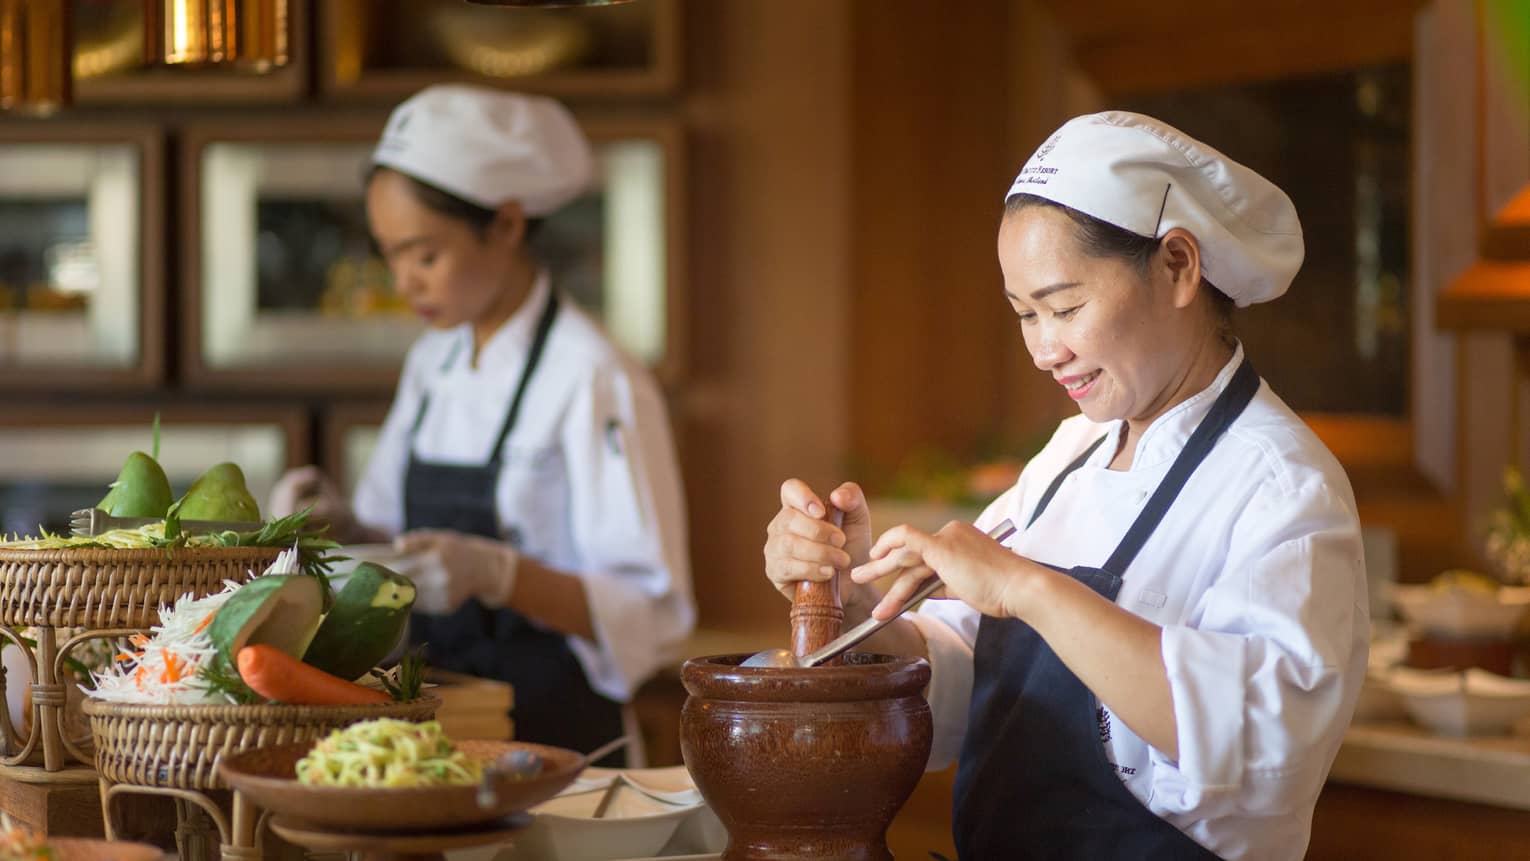 Two chefs in uniform prepare authentic Thai cuisine dishes at counter with fresh vegetables